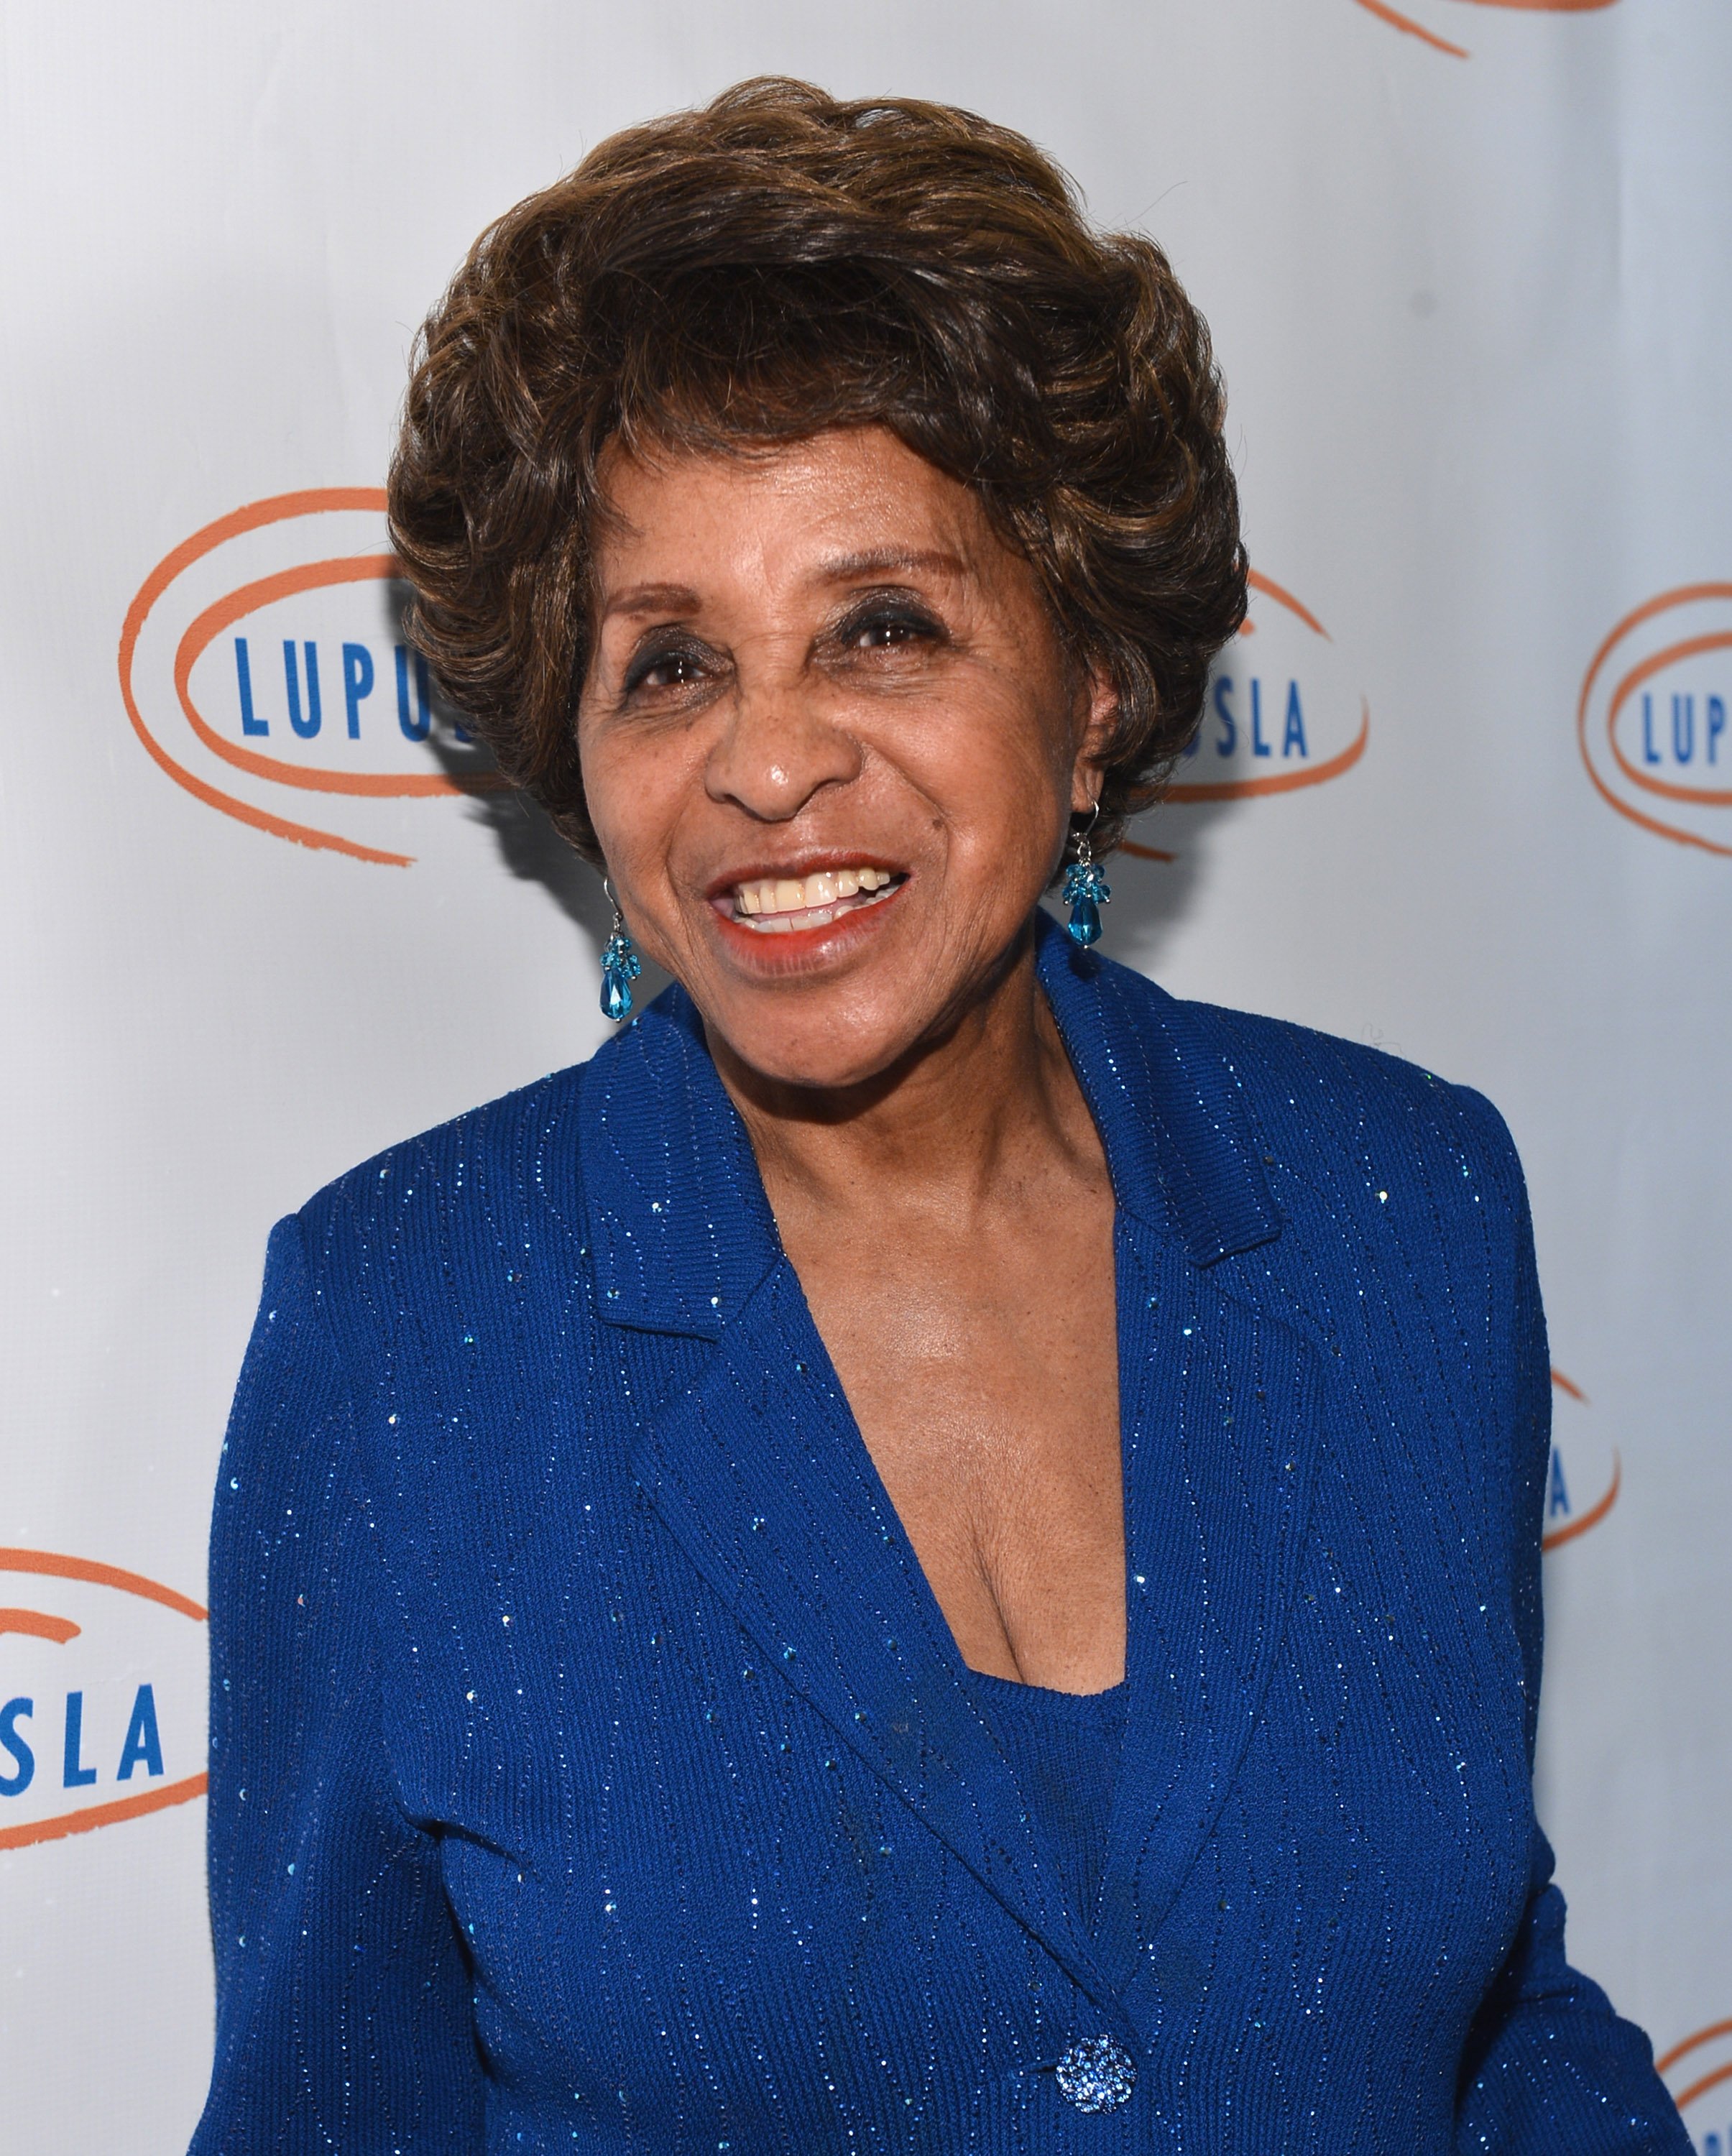 Marla Gibbs at the Lupus LA 10th Anniversary Hollywood Bag Ladies Luncheon on Nov. 1, 2012. | Photo: Getty Images